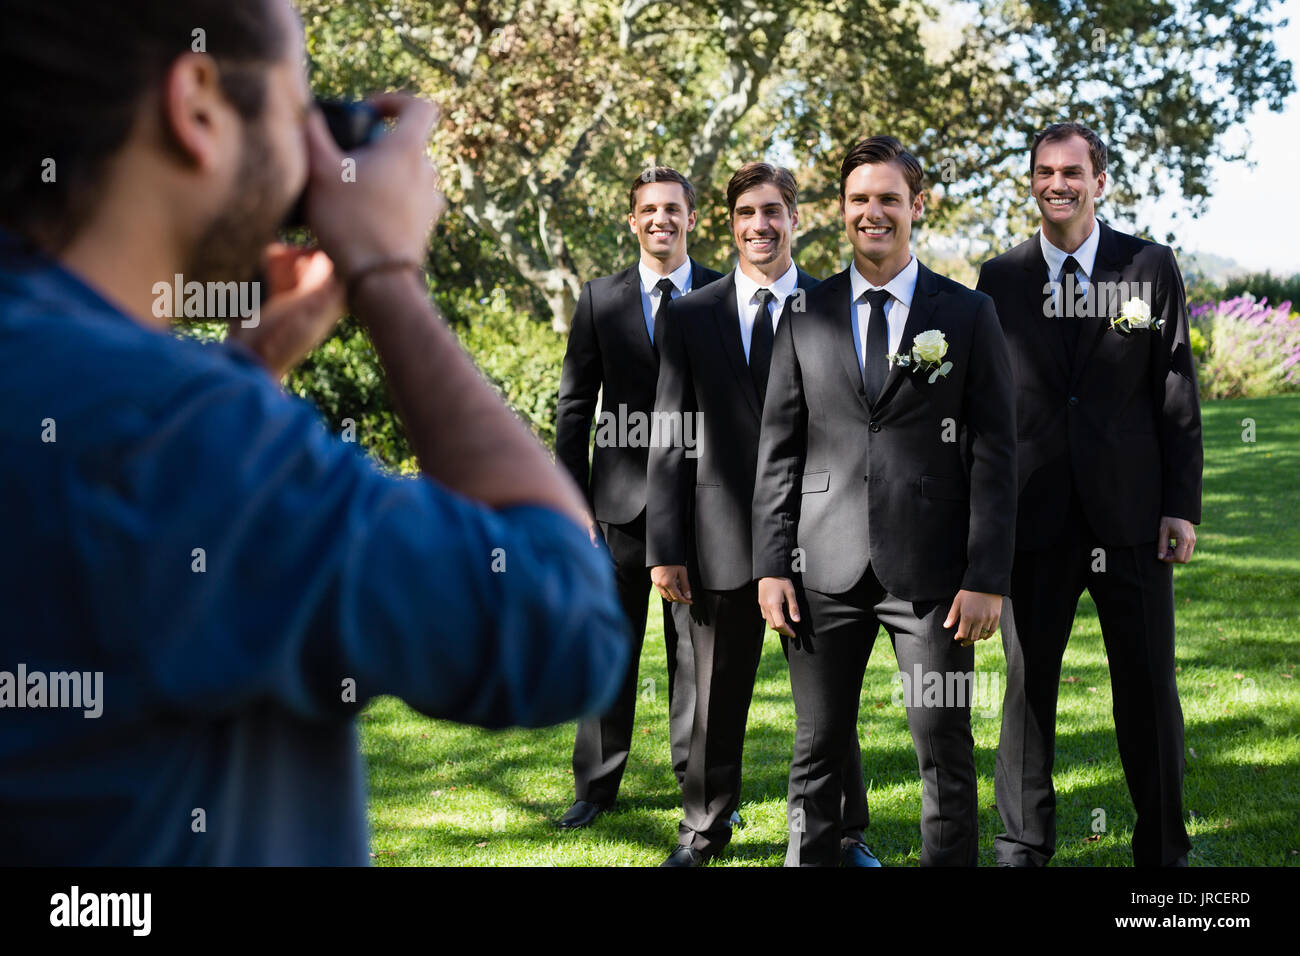 Photographer taking photo of groom and groomsmen at park Stock Photo